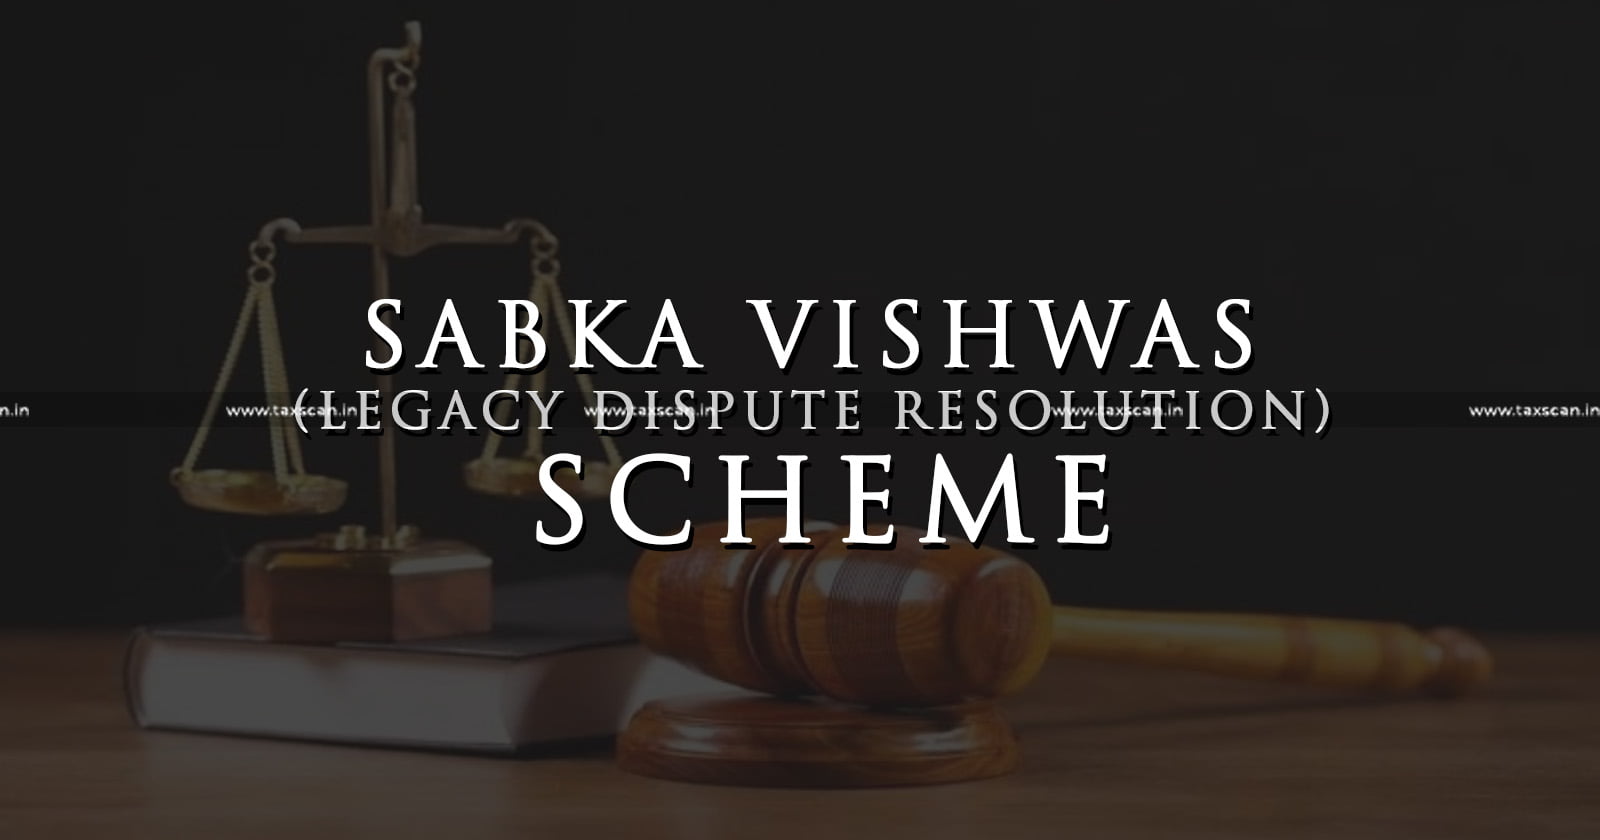 Excluding Taxpayers from the SVLDR Scheme due to obvious errors is contrary to its object - Delhi High Court quashes Order Rejecting SLVDR Declaration - Taxpayers - SVLDR Scheme - Delhi High Court - SLVDR Declaration - Taxscan